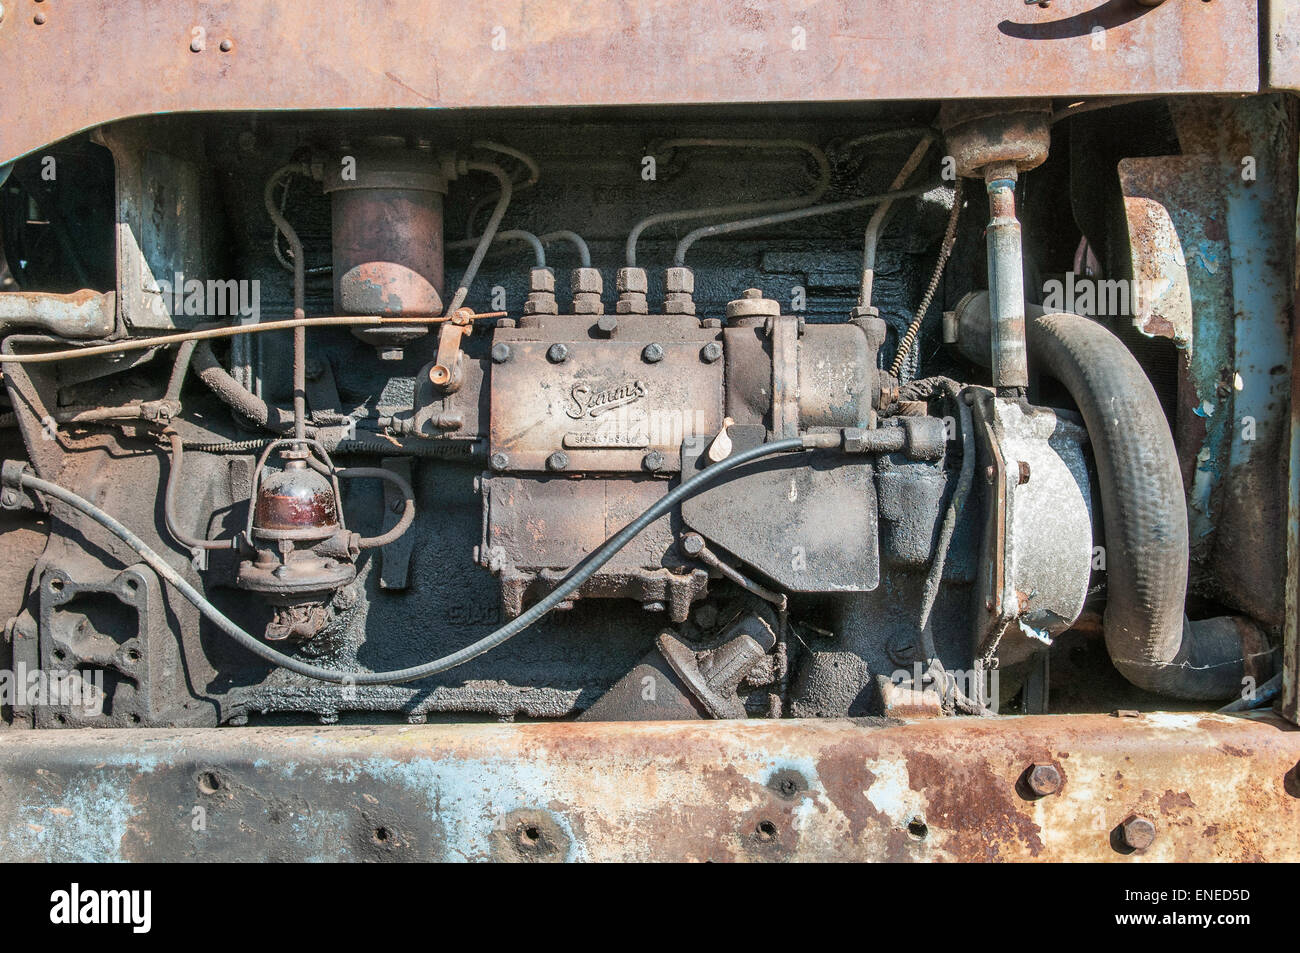 Engine of old Fordson Major tractor Stock Photo - Alamy